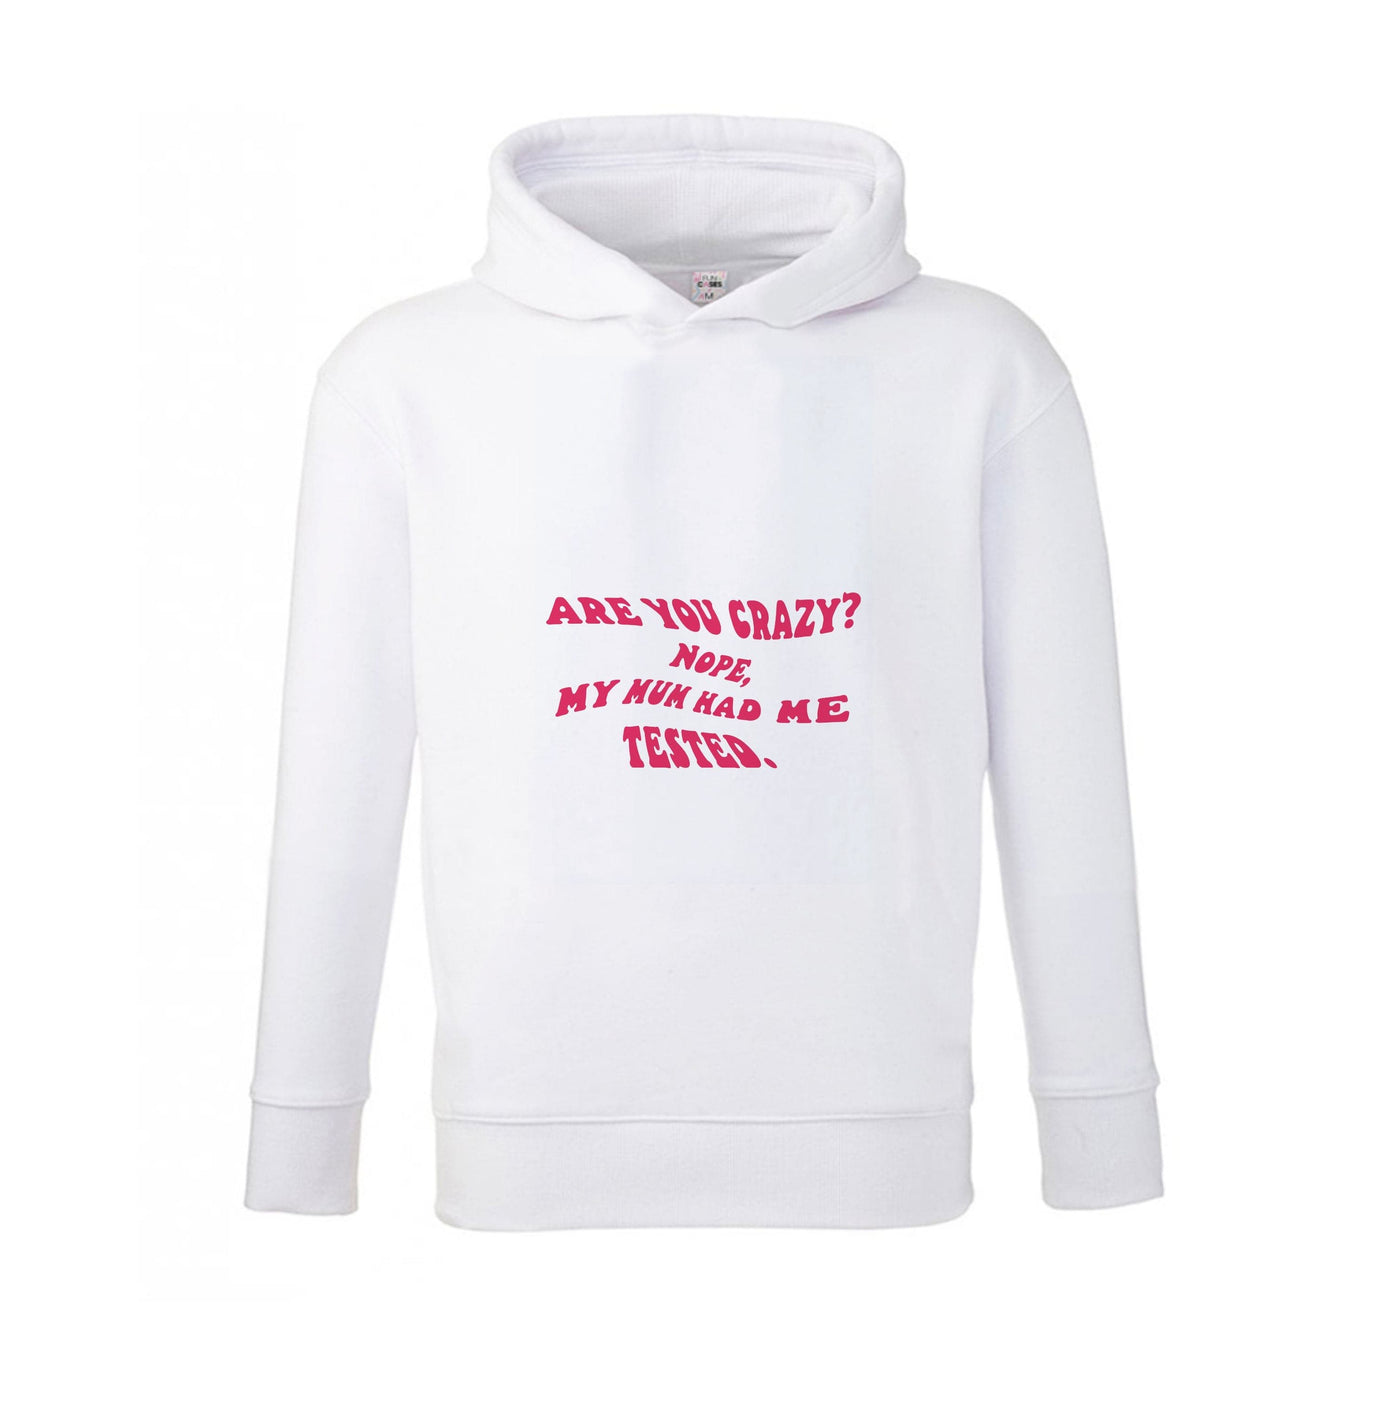 Are You Crazy? - Young Sheldon Kids Hoodie